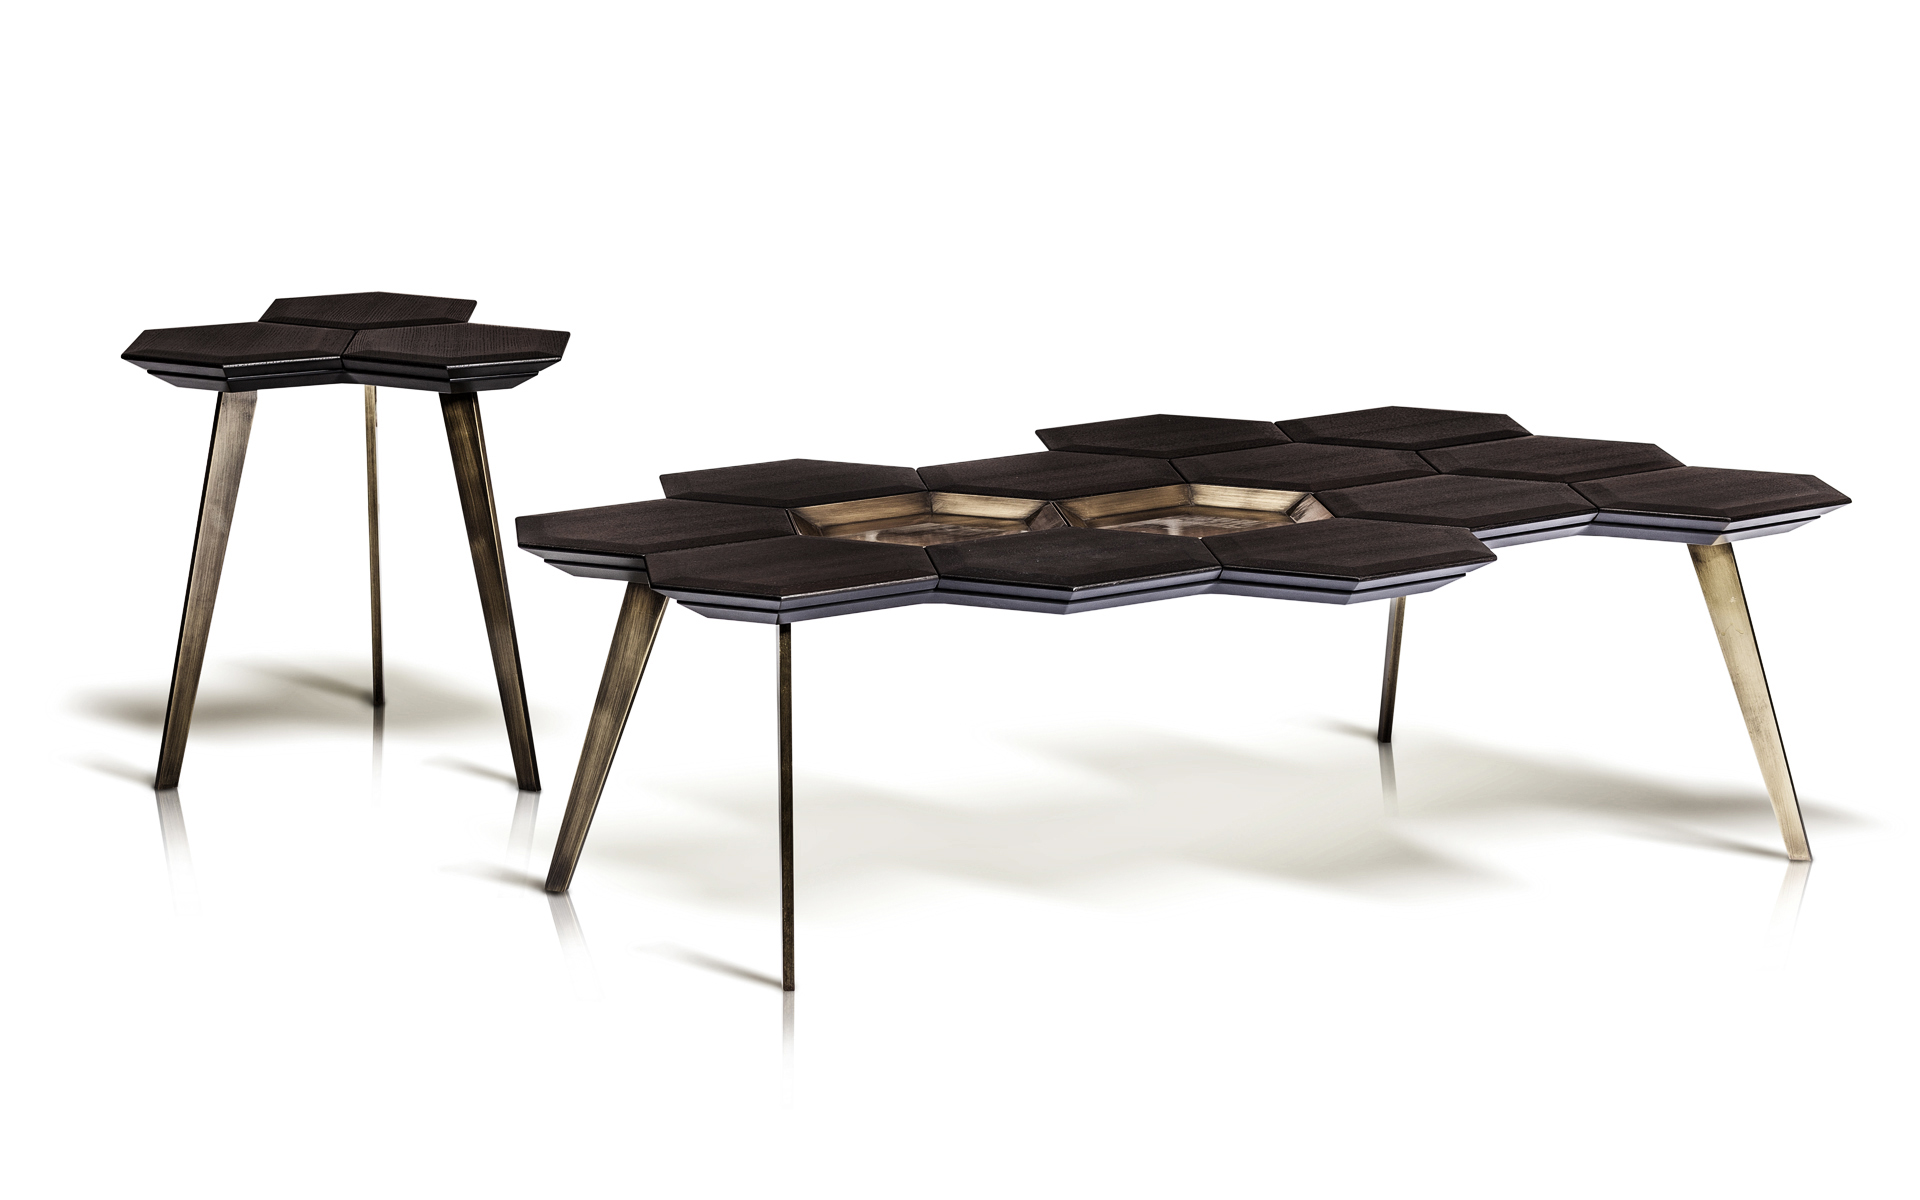 Icy-A Coffee Table & Side Table by Marconato Maurizio & Terry Zappa for ENNE